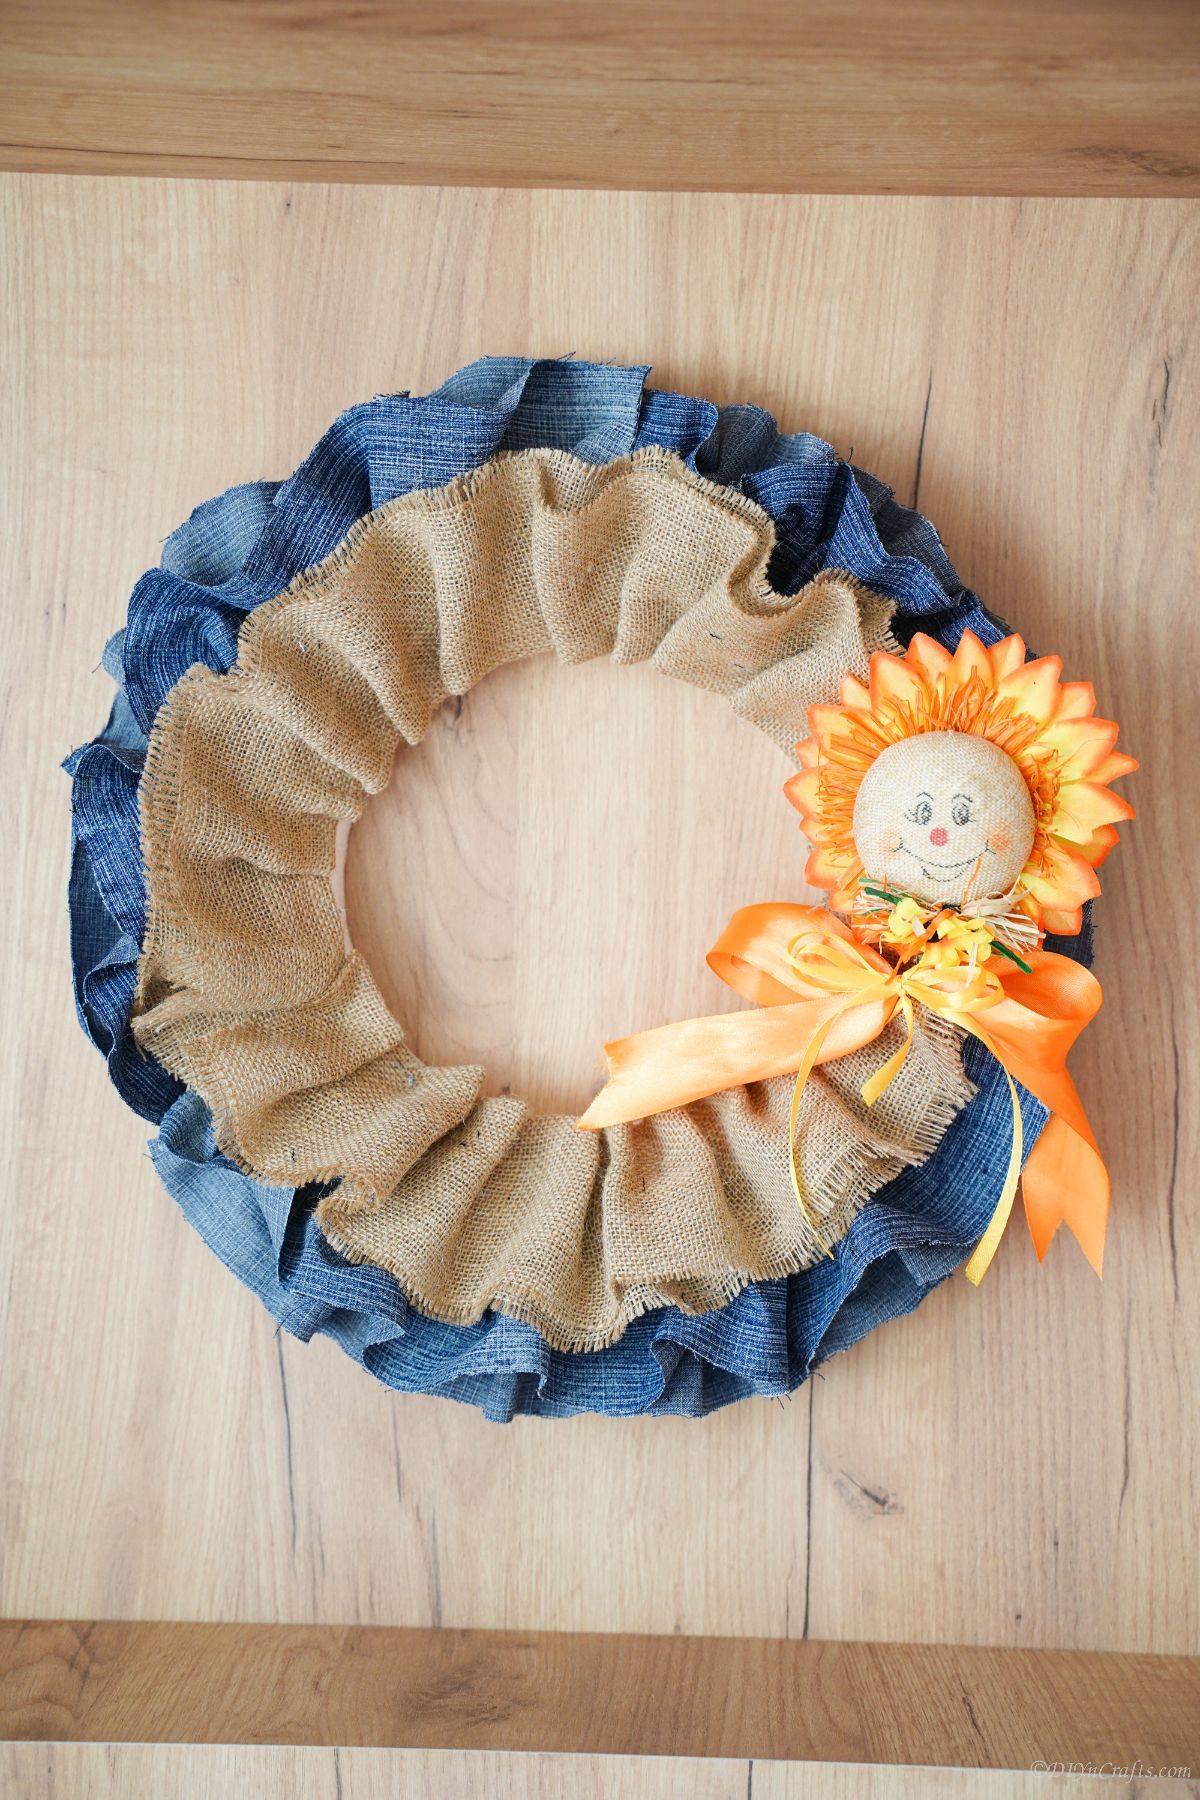 denim and burlap wreath on wood wall with small scarecrow on side